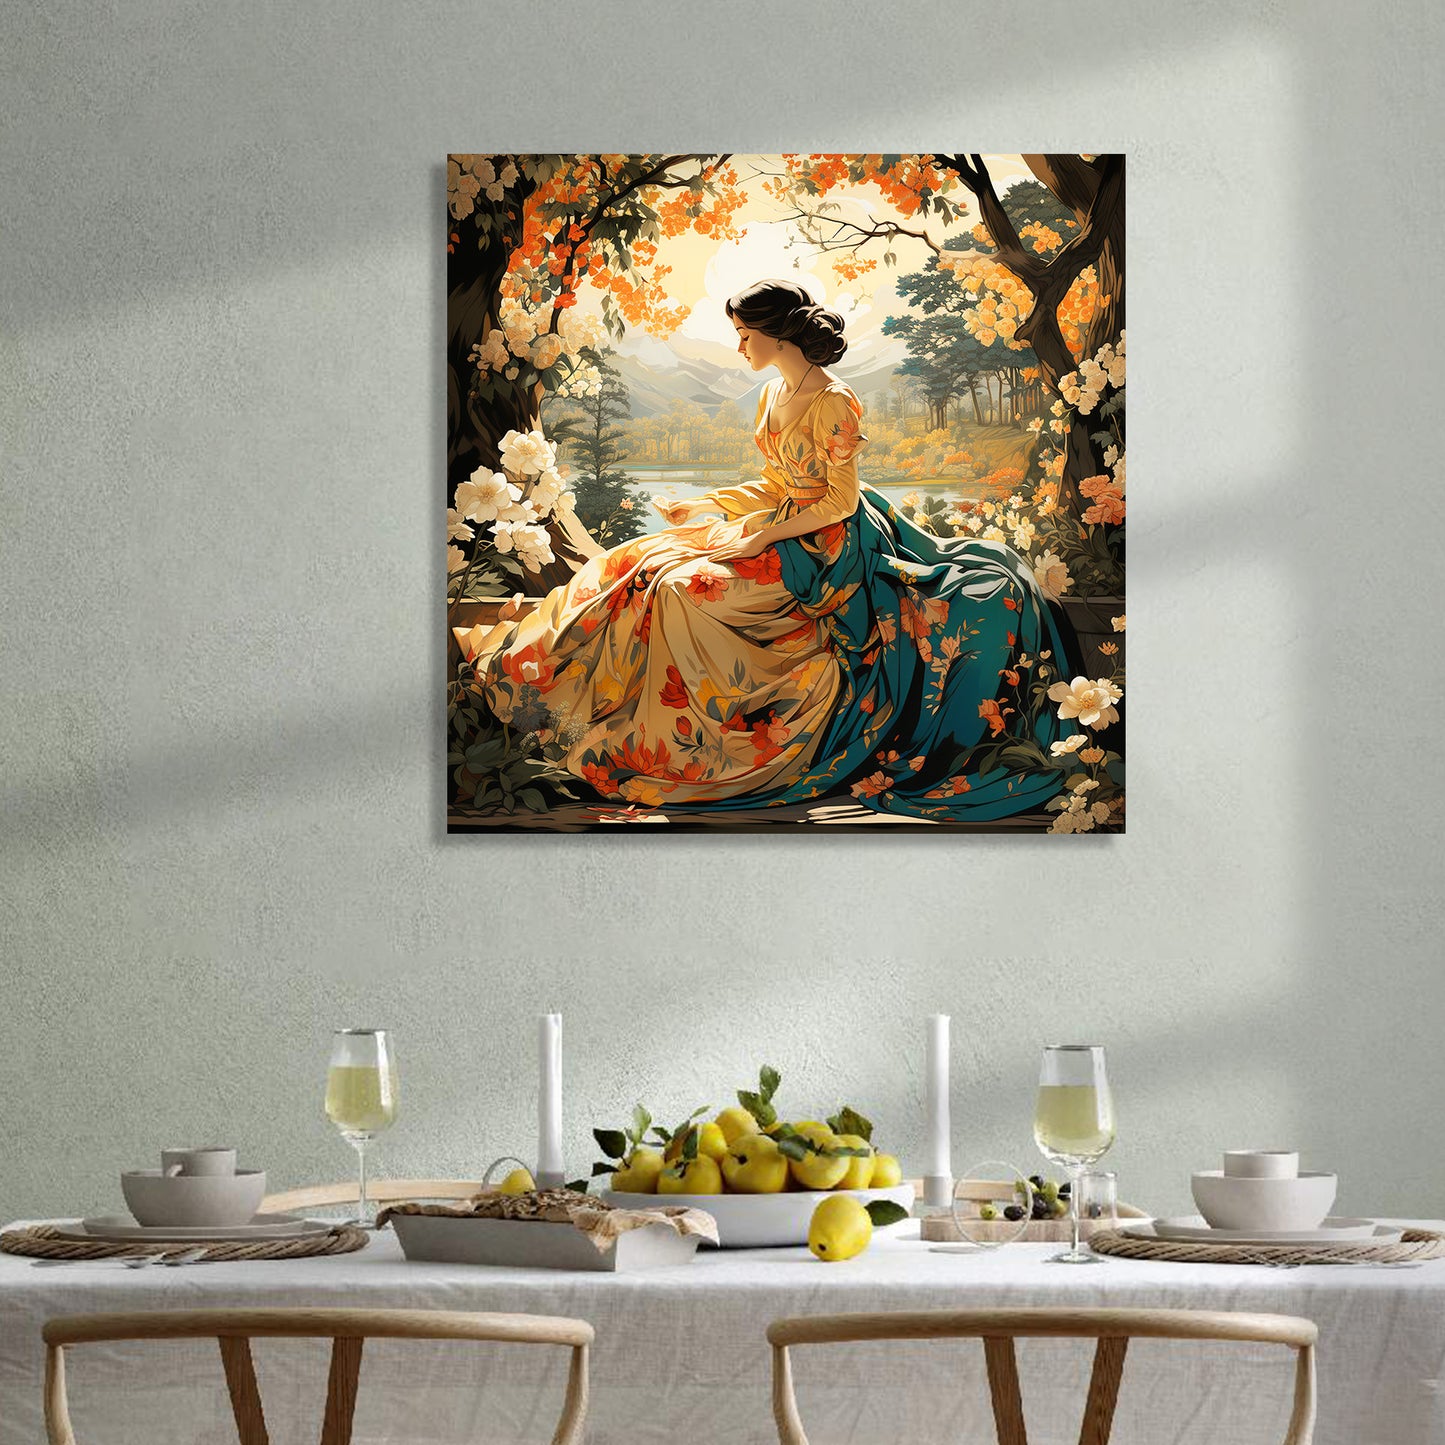 Modern Art Canvas Painting for Living Room Bedroom Home and Office Wall Decor